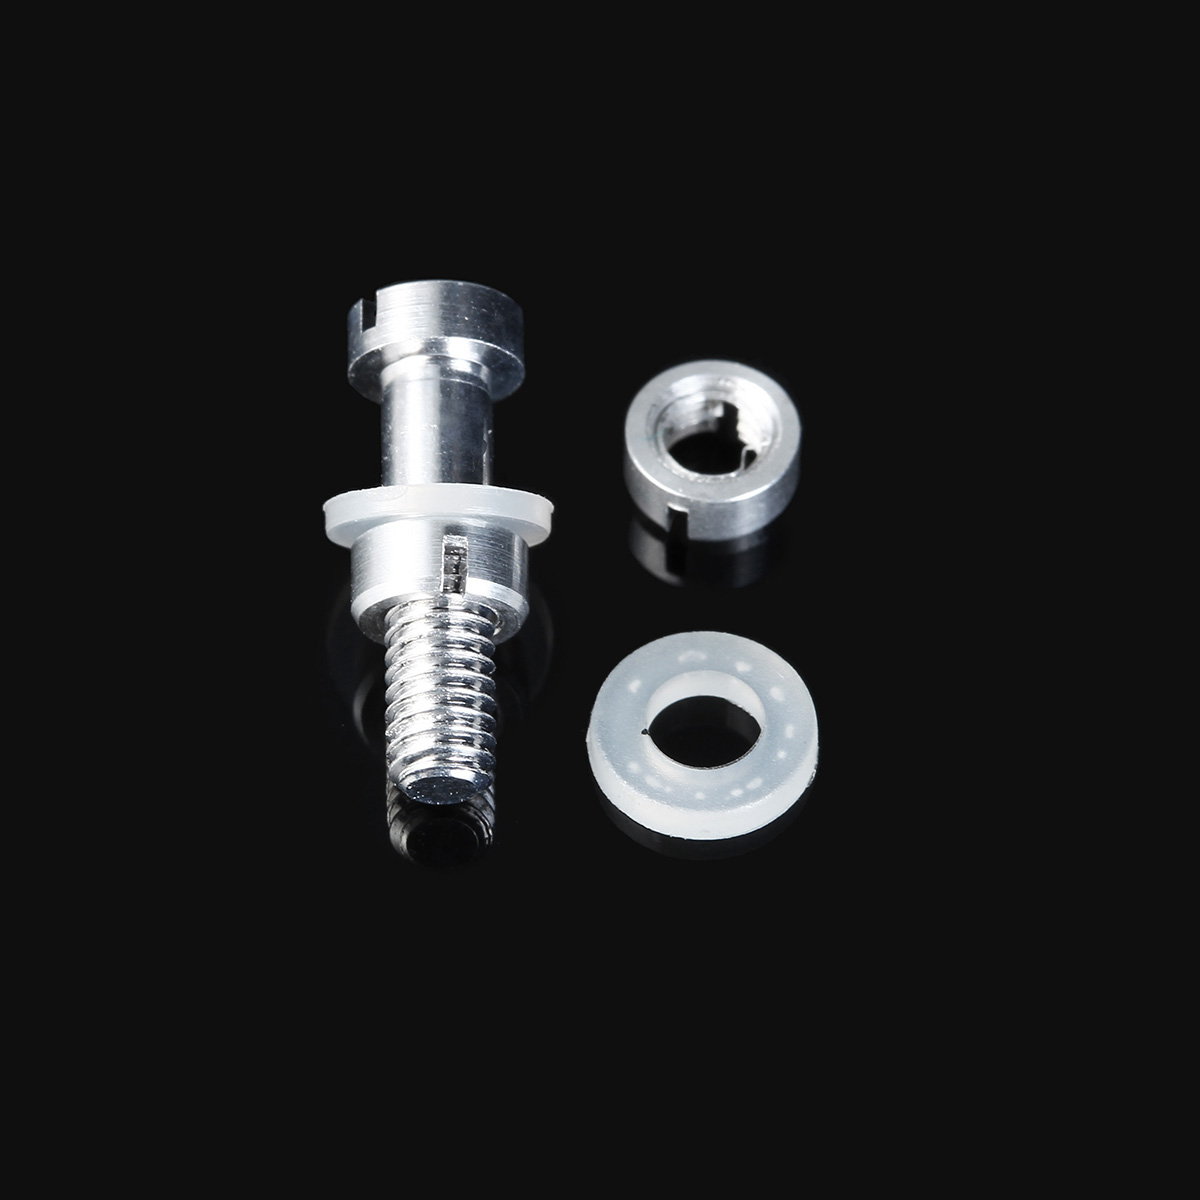 7.5mm/10.5mm/11.5mm/13.5mm/16.5mm M2.5mm Mounting Screw Set For Record Player 22